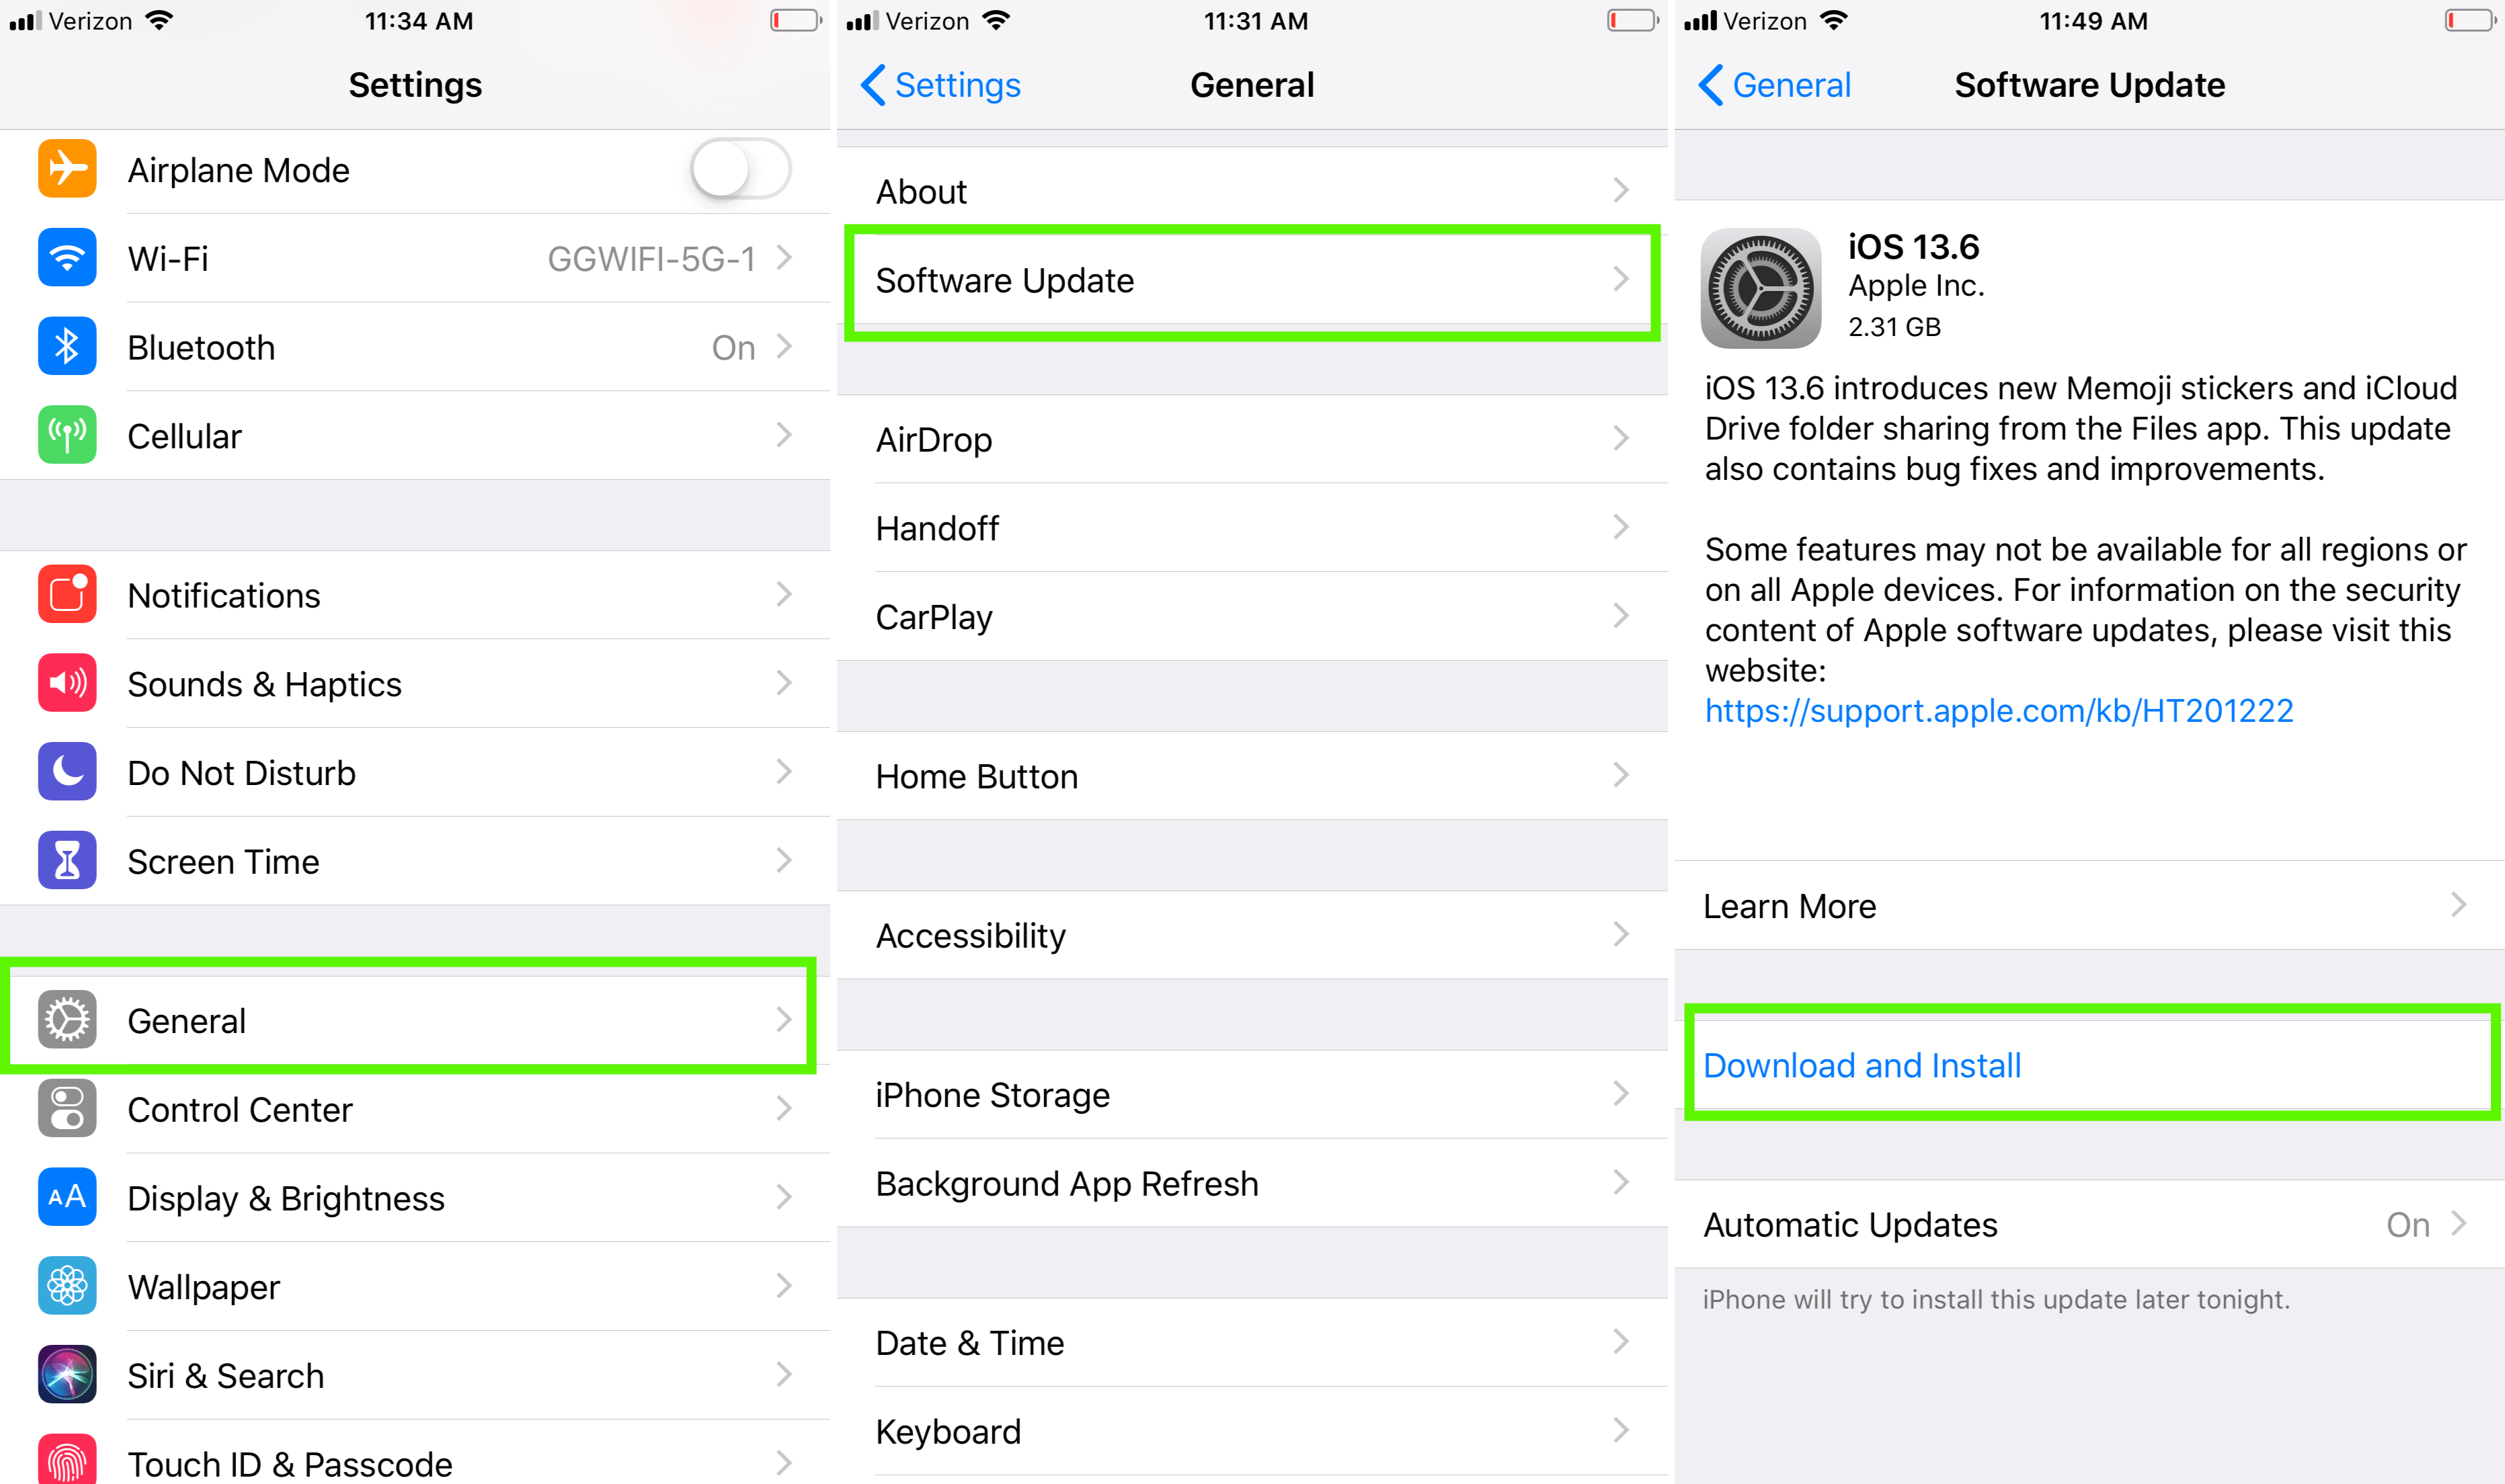 AirDrop not working on iPhone? Update your device.